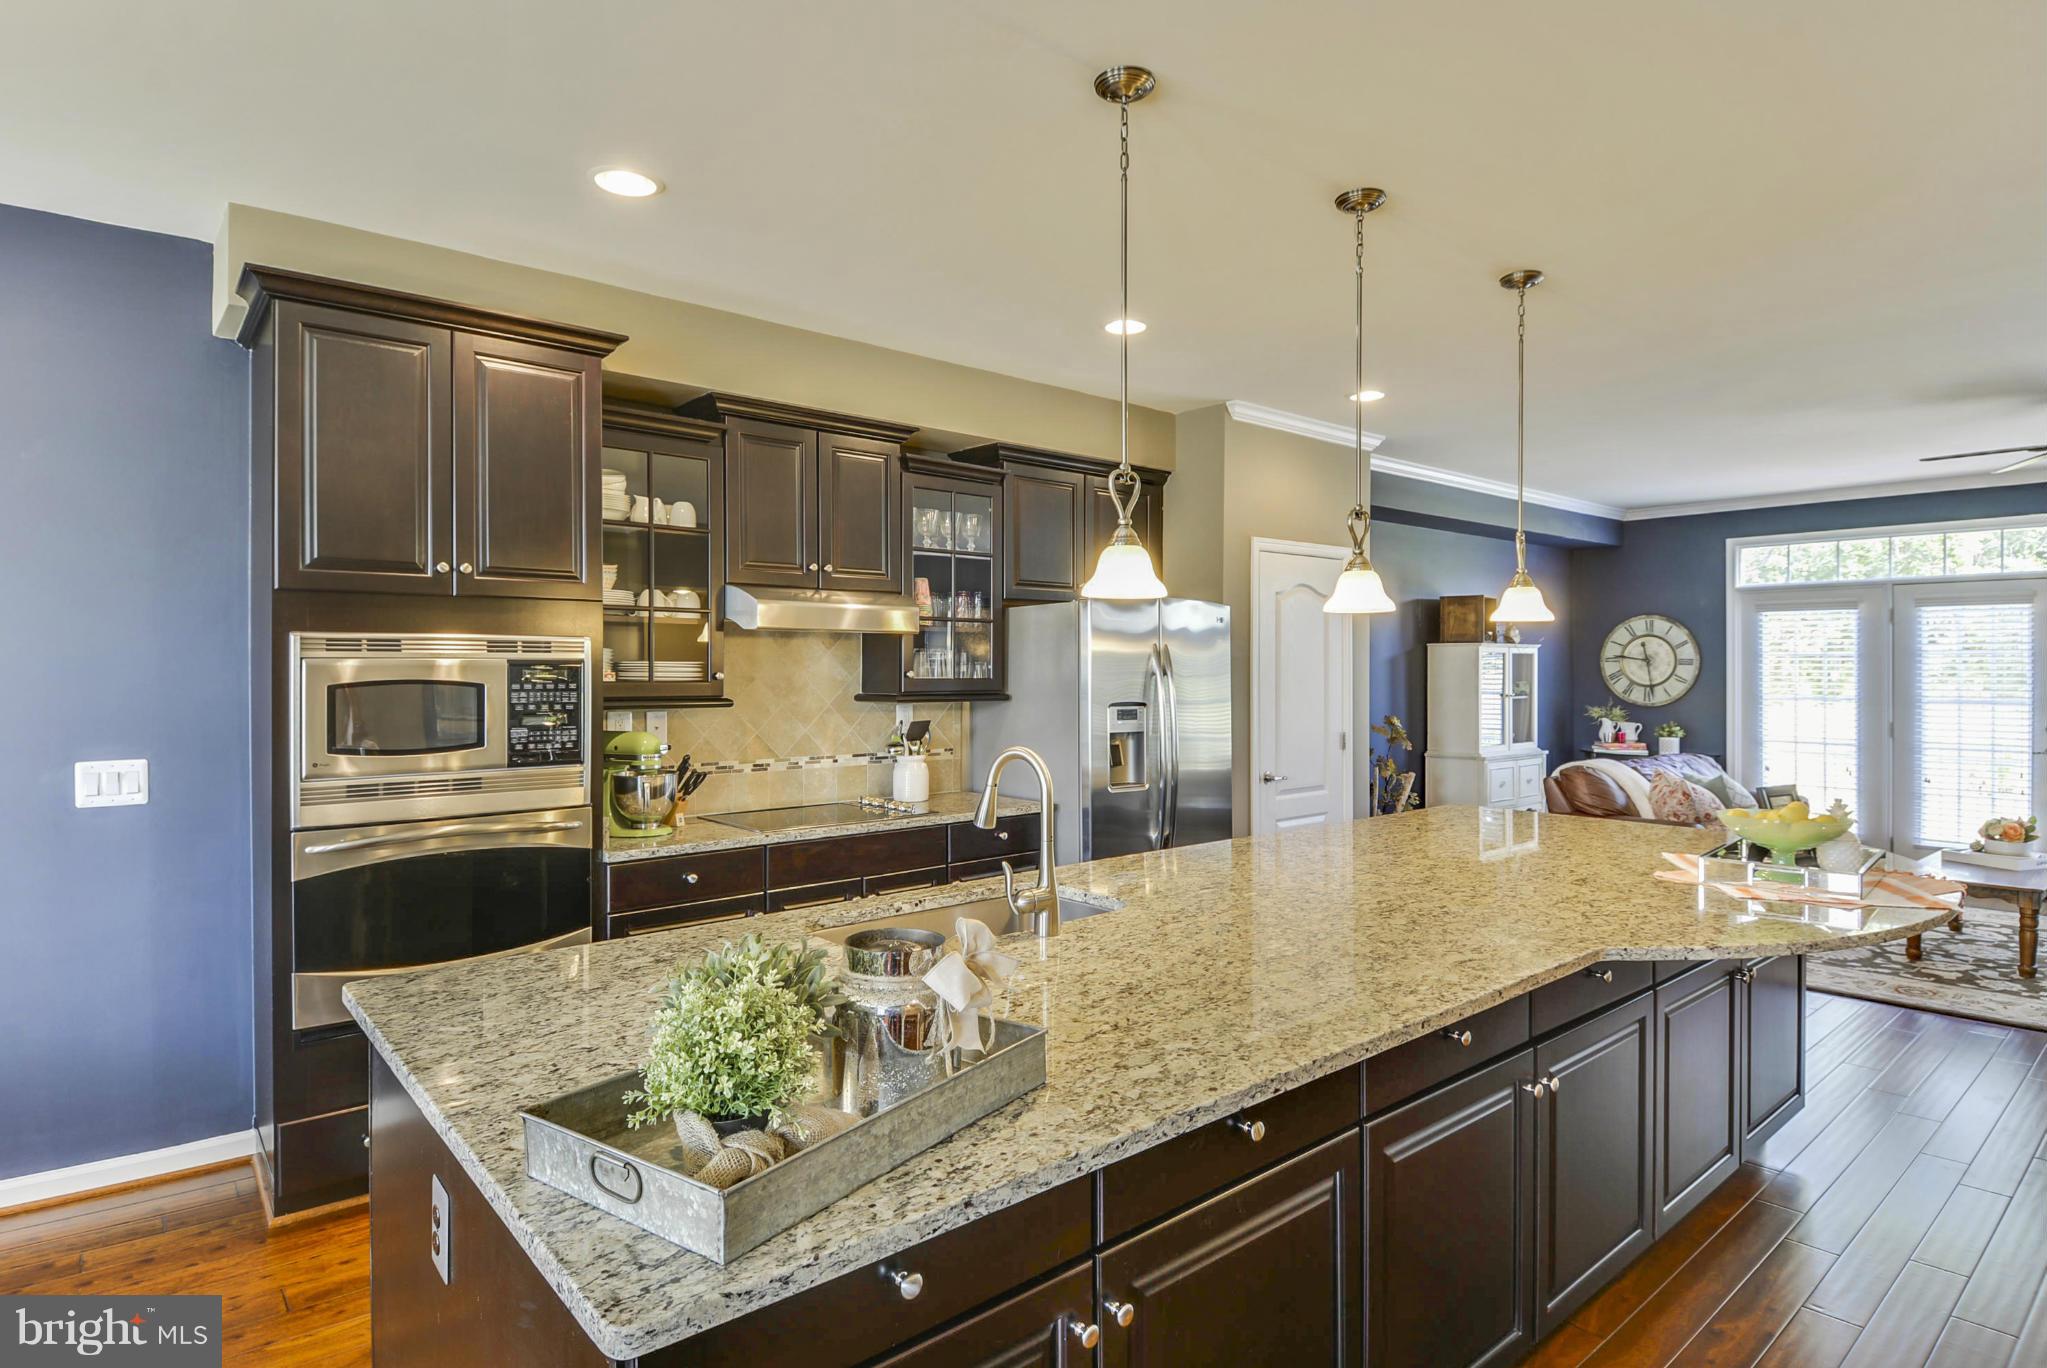 a view of a kitchen with kitchen island a counter top space a sink stainless steel appliances and cabinets